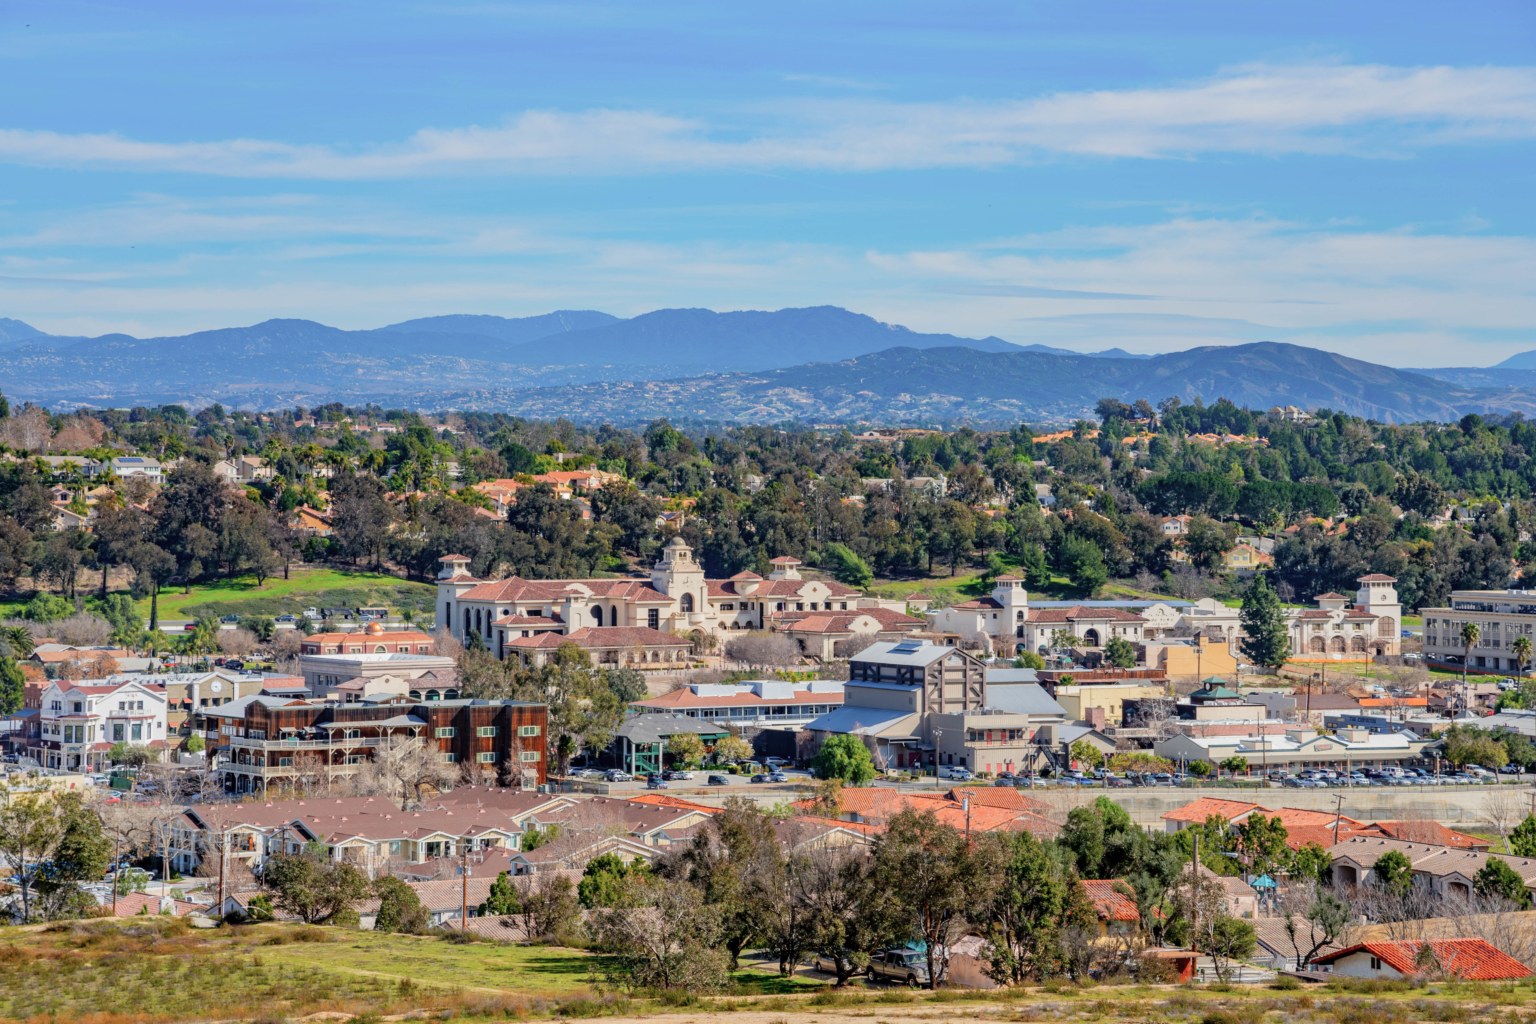 Riverside california skyline with the sierra madre mountains in the background